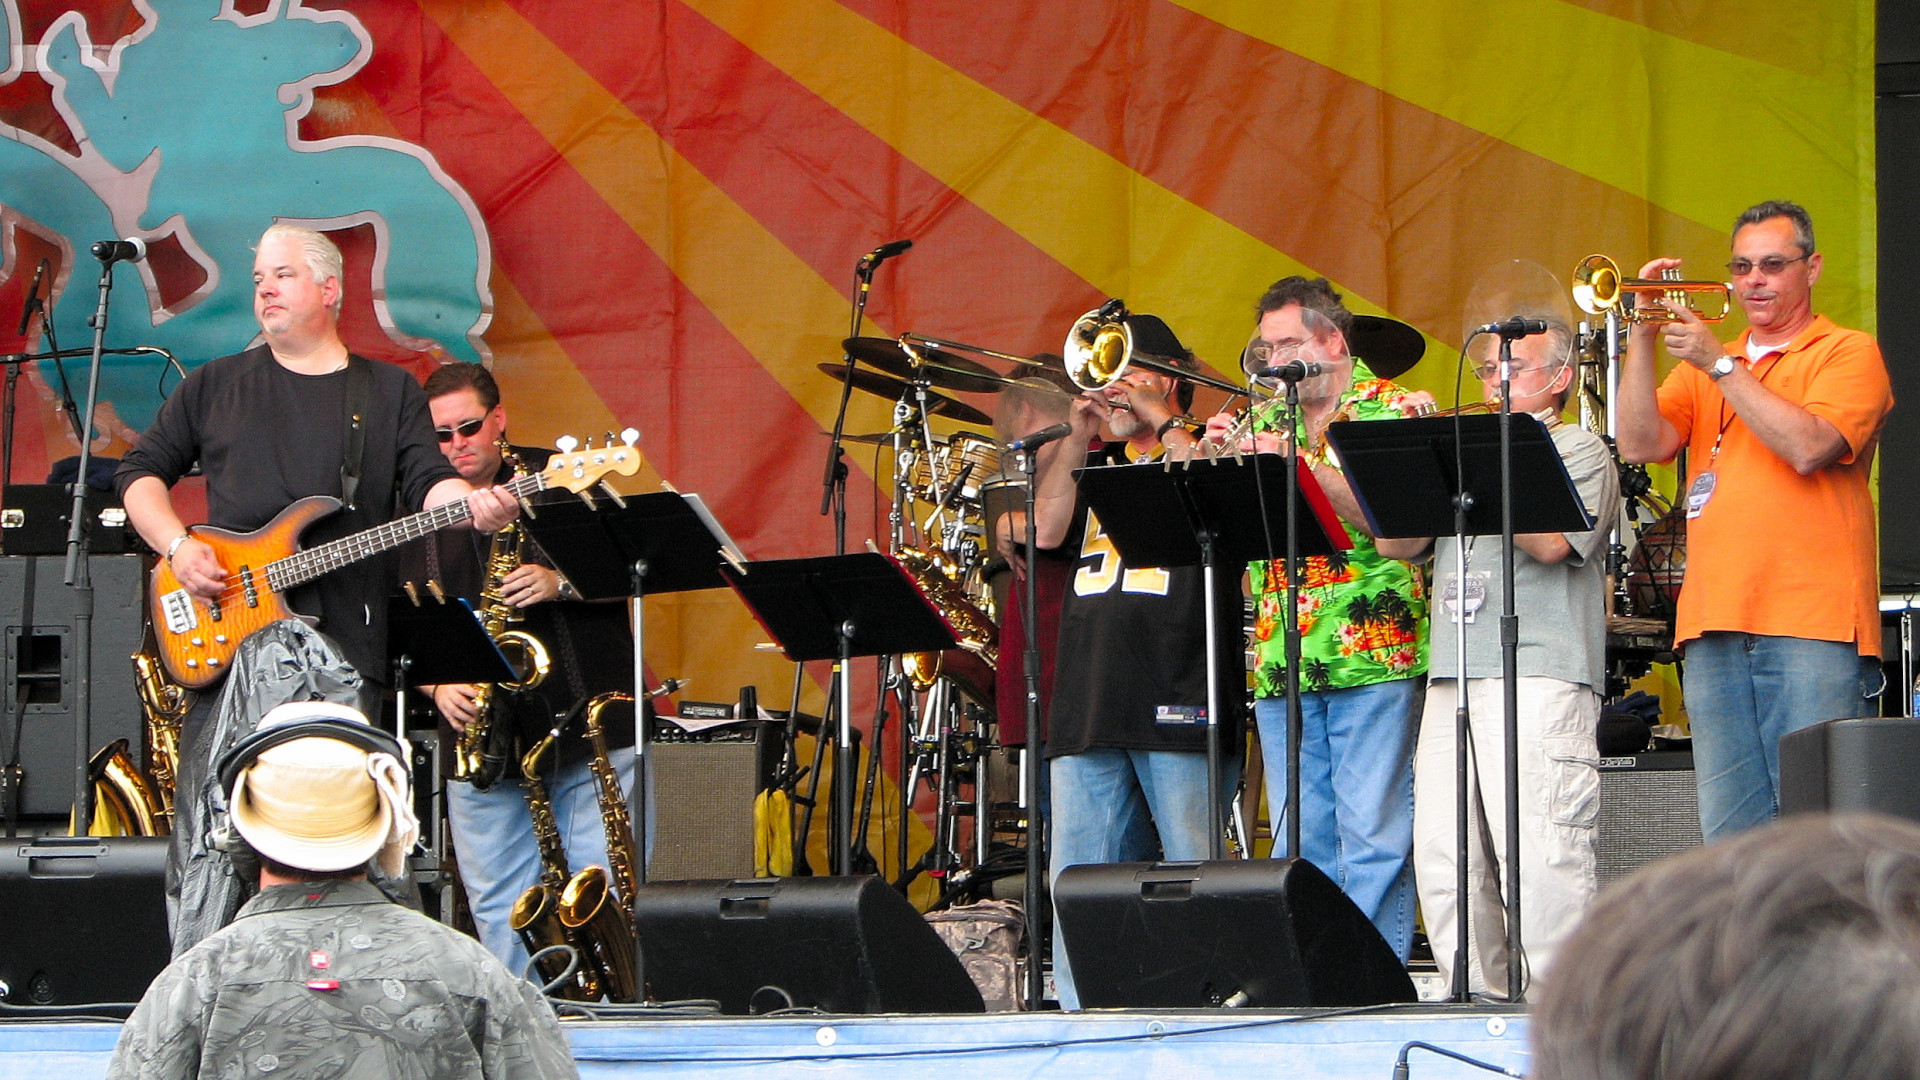 Chris Cambell on bass with the Wiseguys horn section